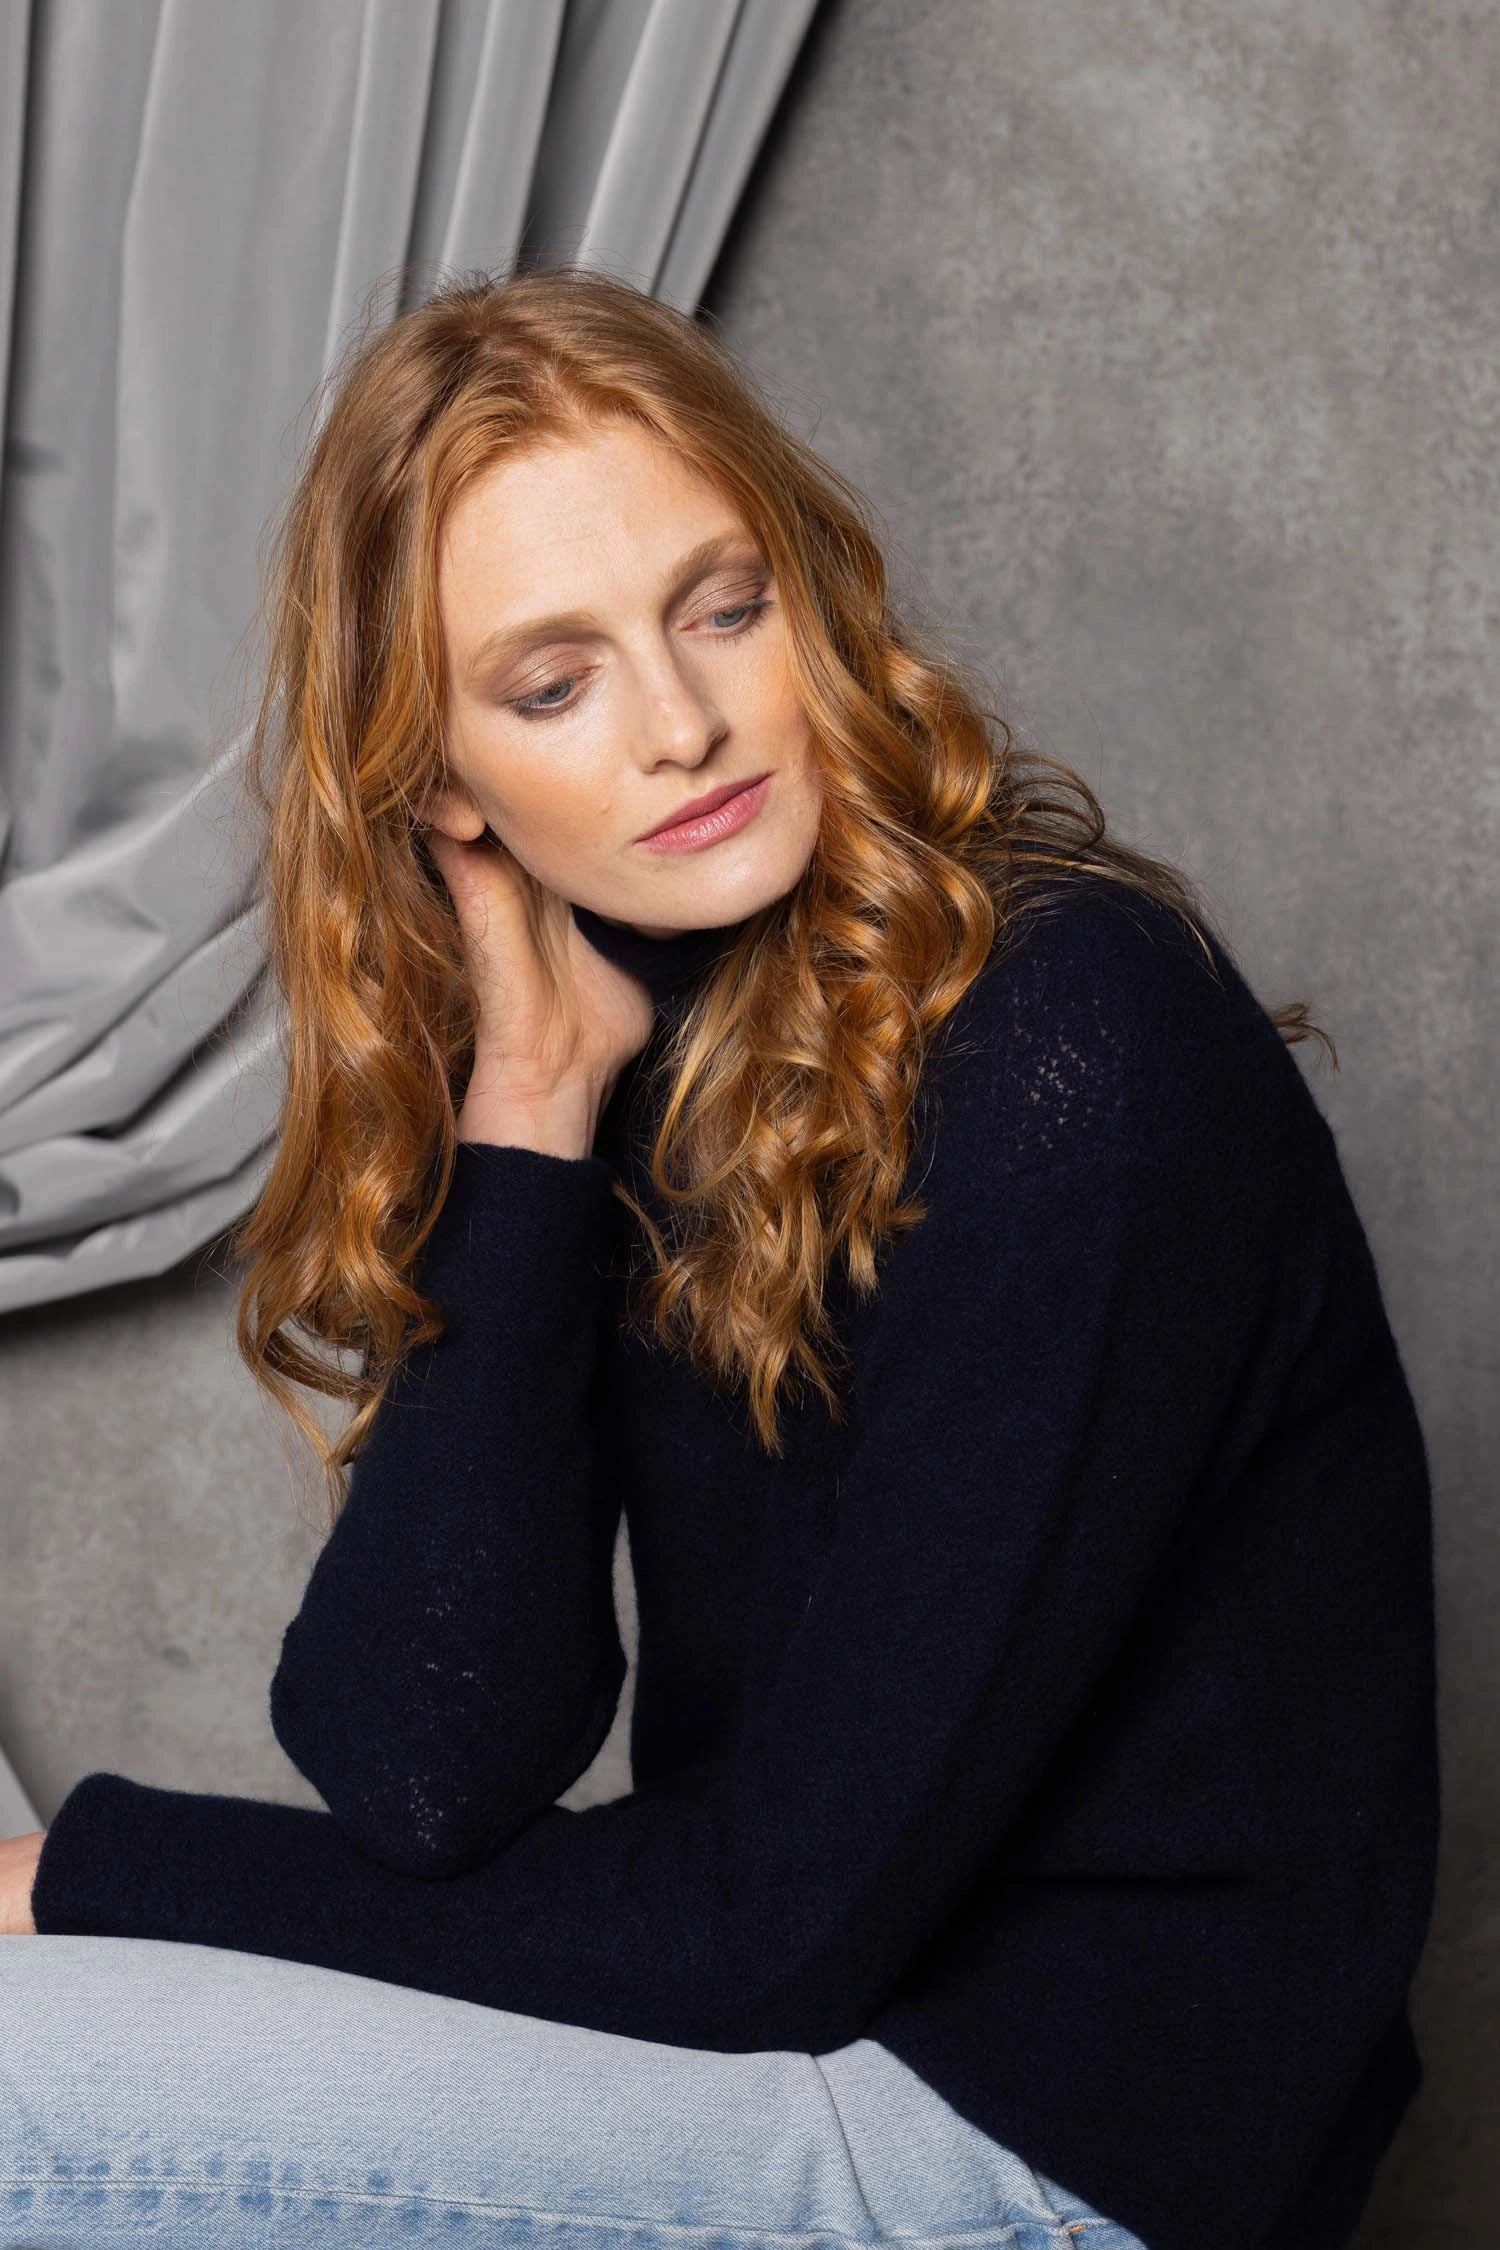 Lace Cashmere Turtleneck Sweater in Navy